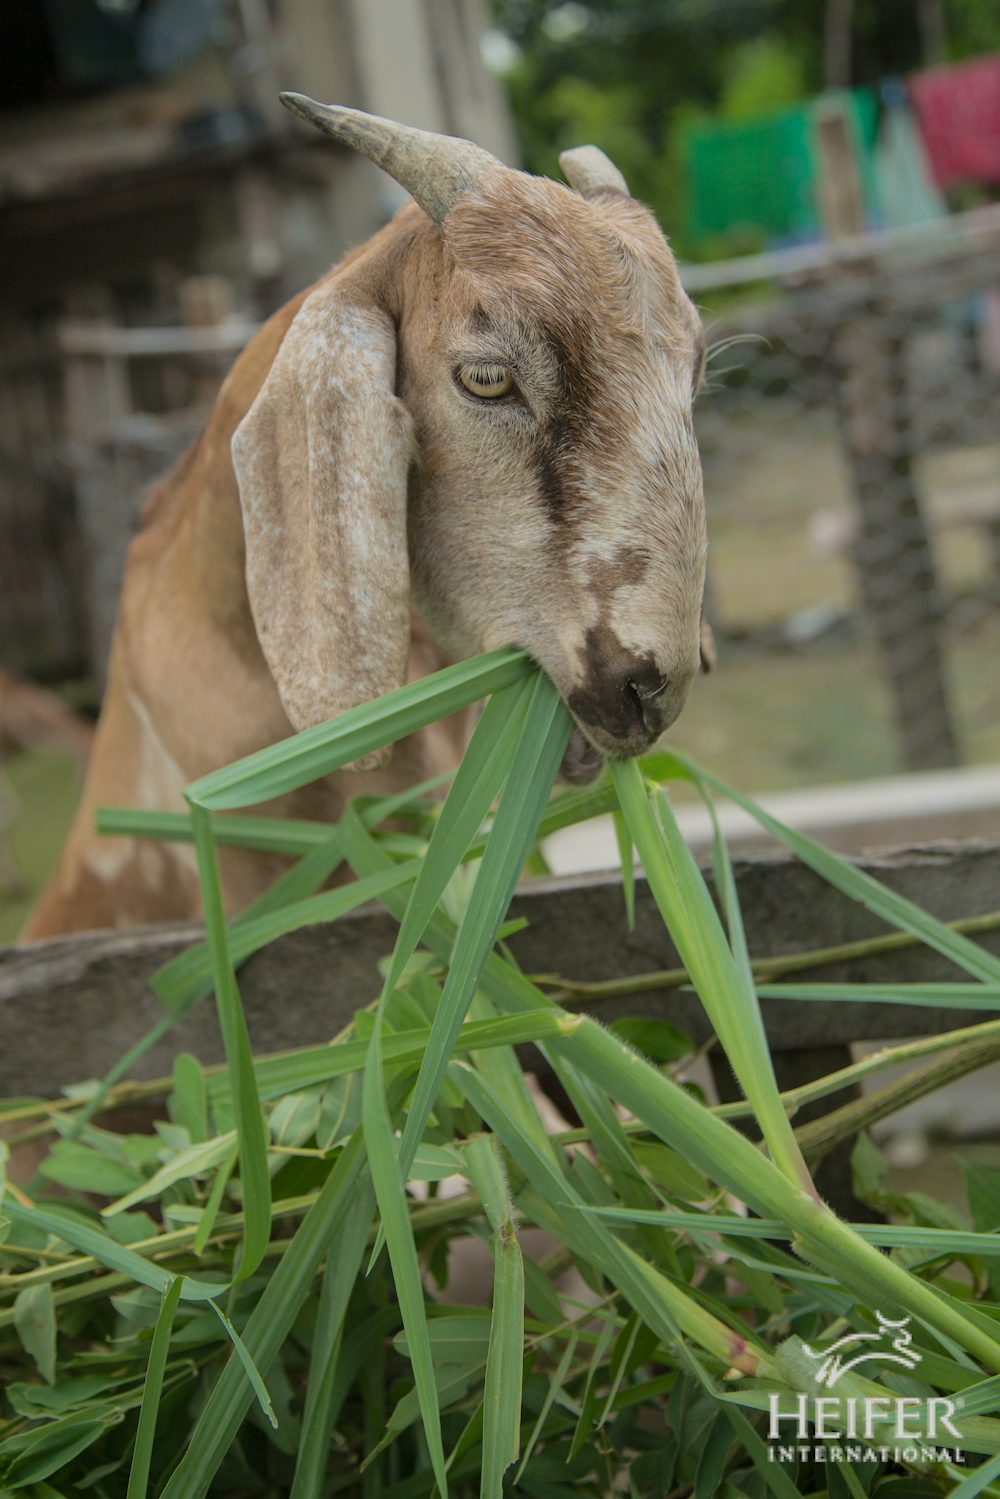 A close-up of a goat chewing on some grass.